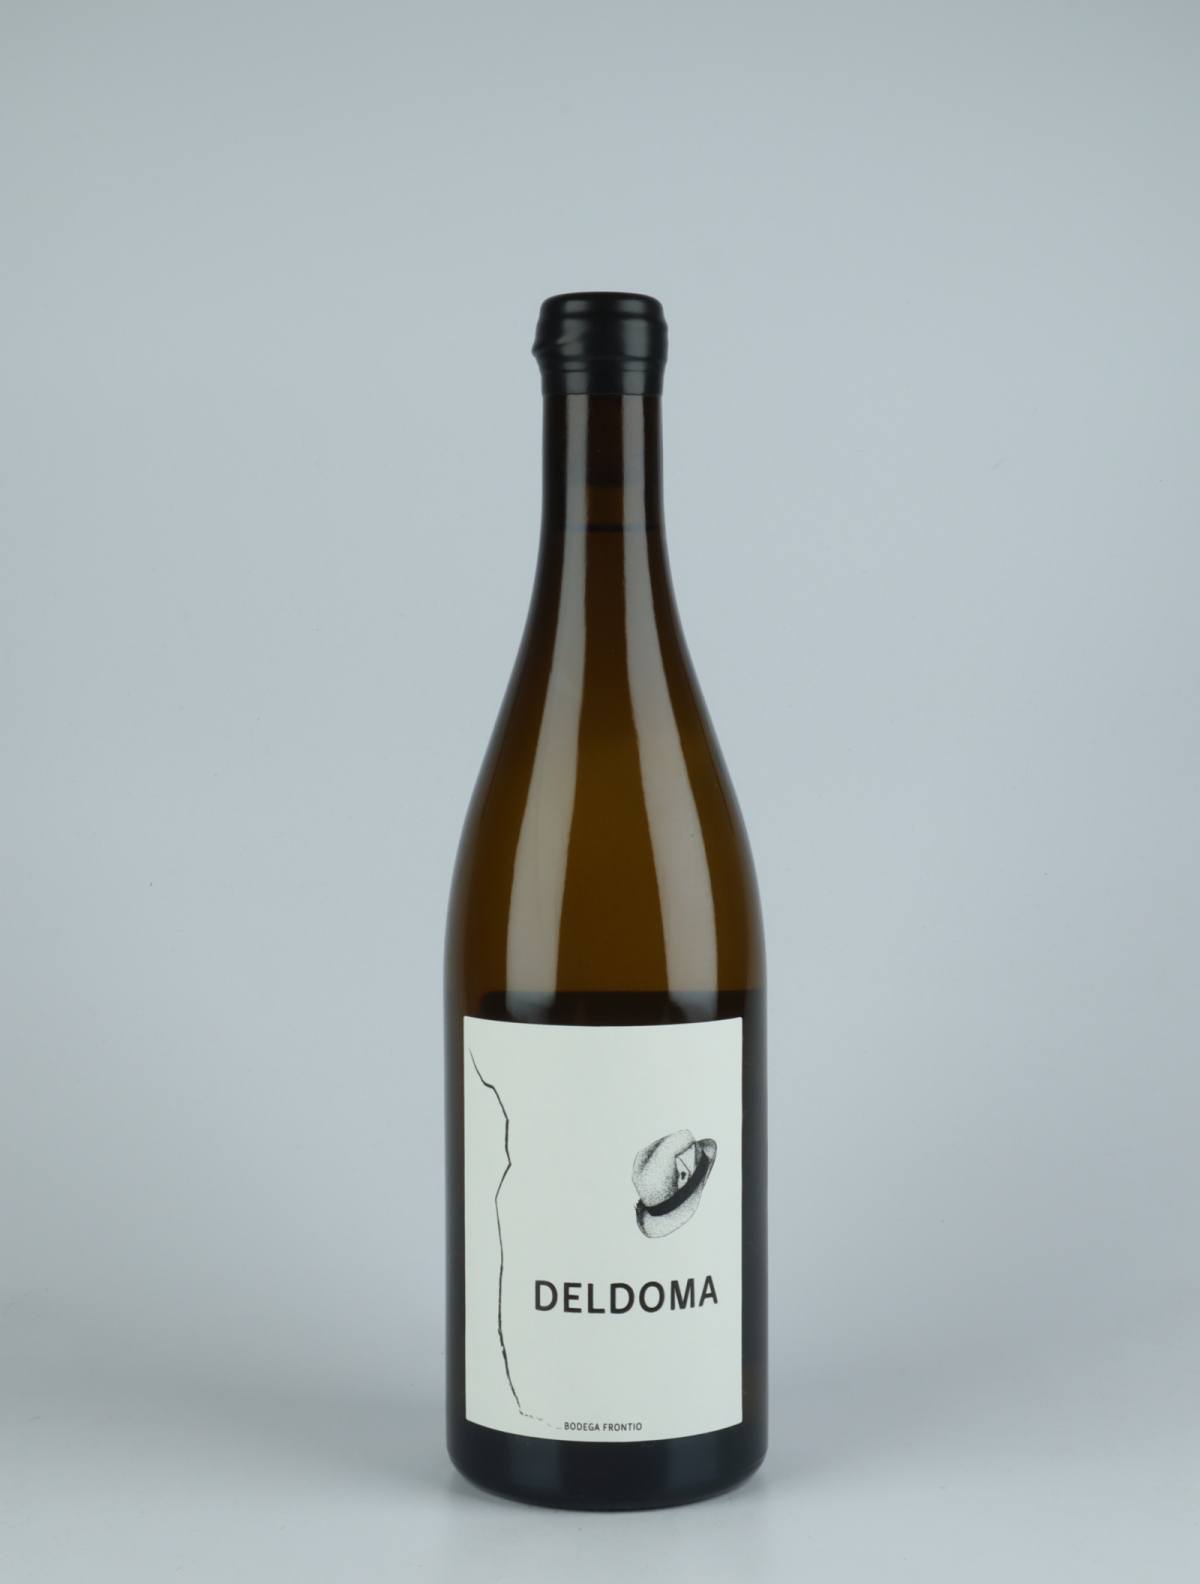 A bottle 2020 Deldoma White wine from Bodega Frontio, Arribes in Spain